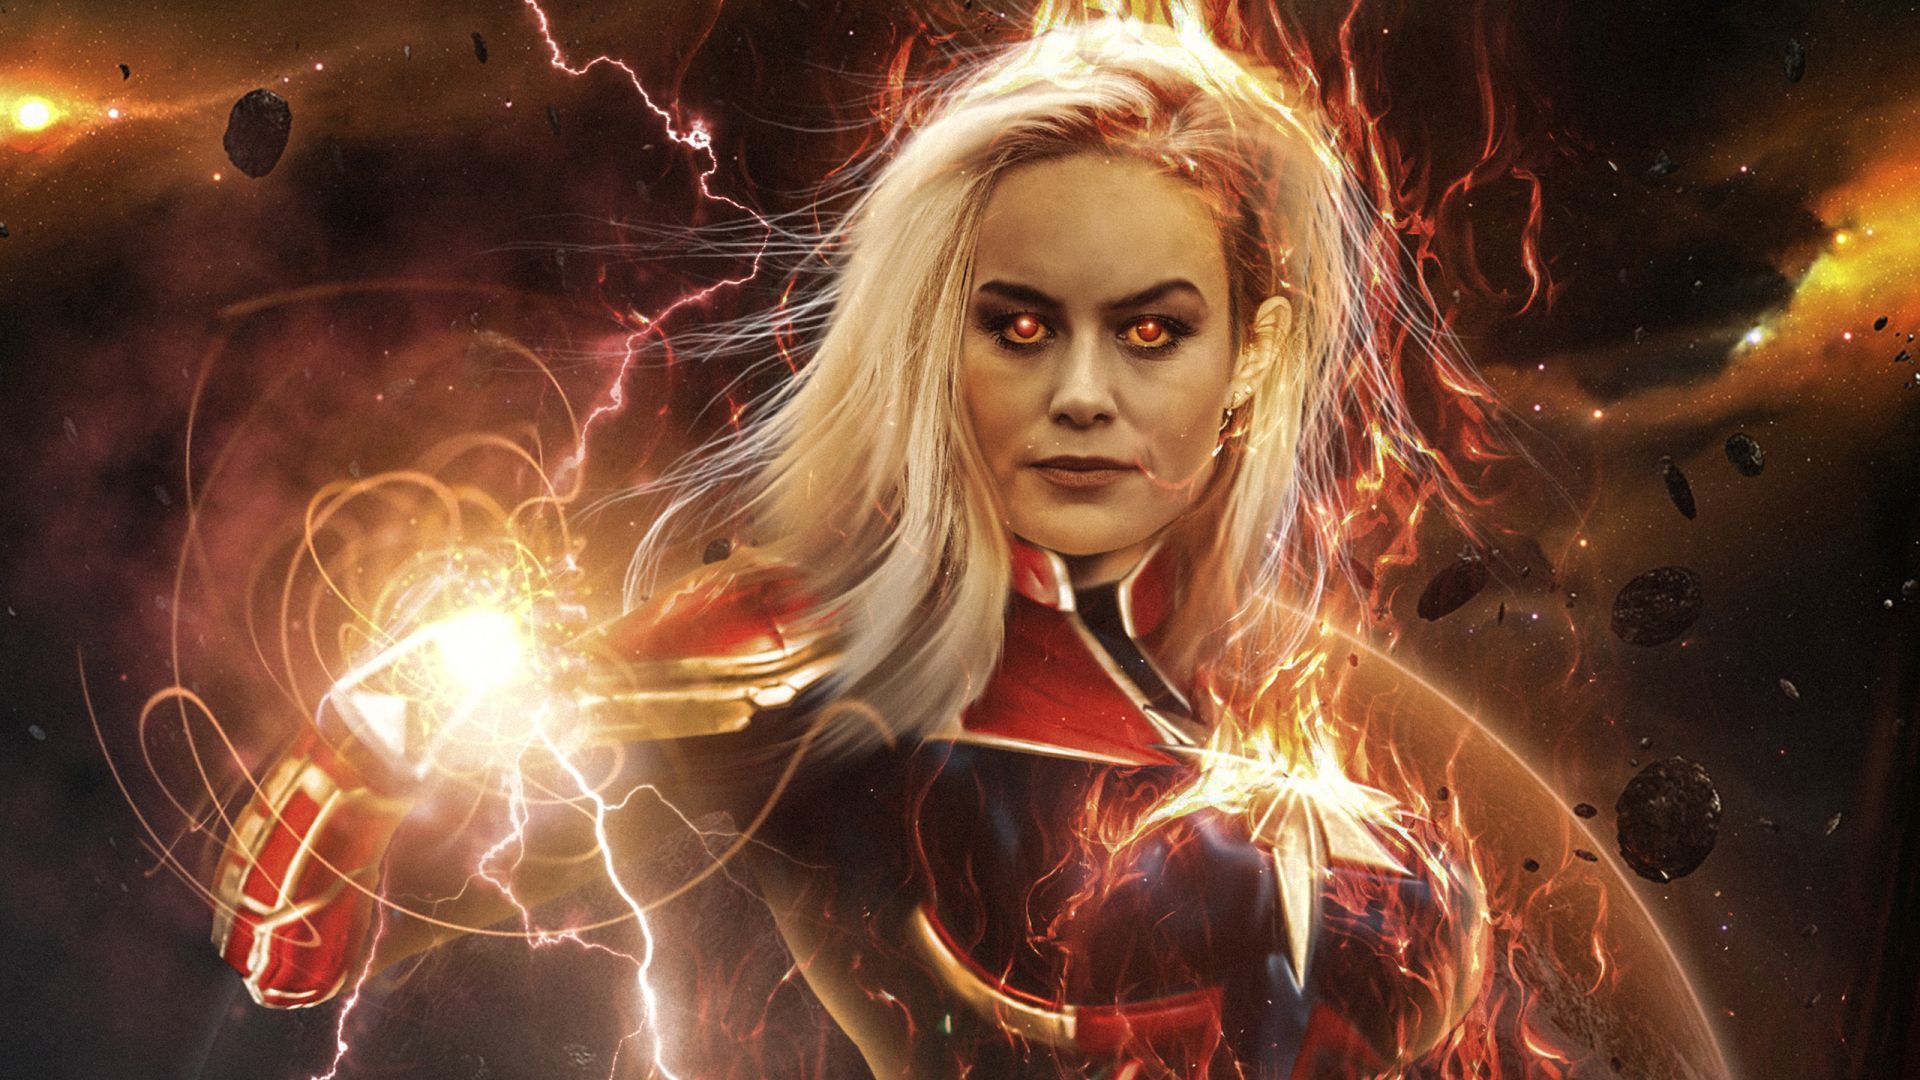 Captain Marvel download free wallpapers for pc in hd